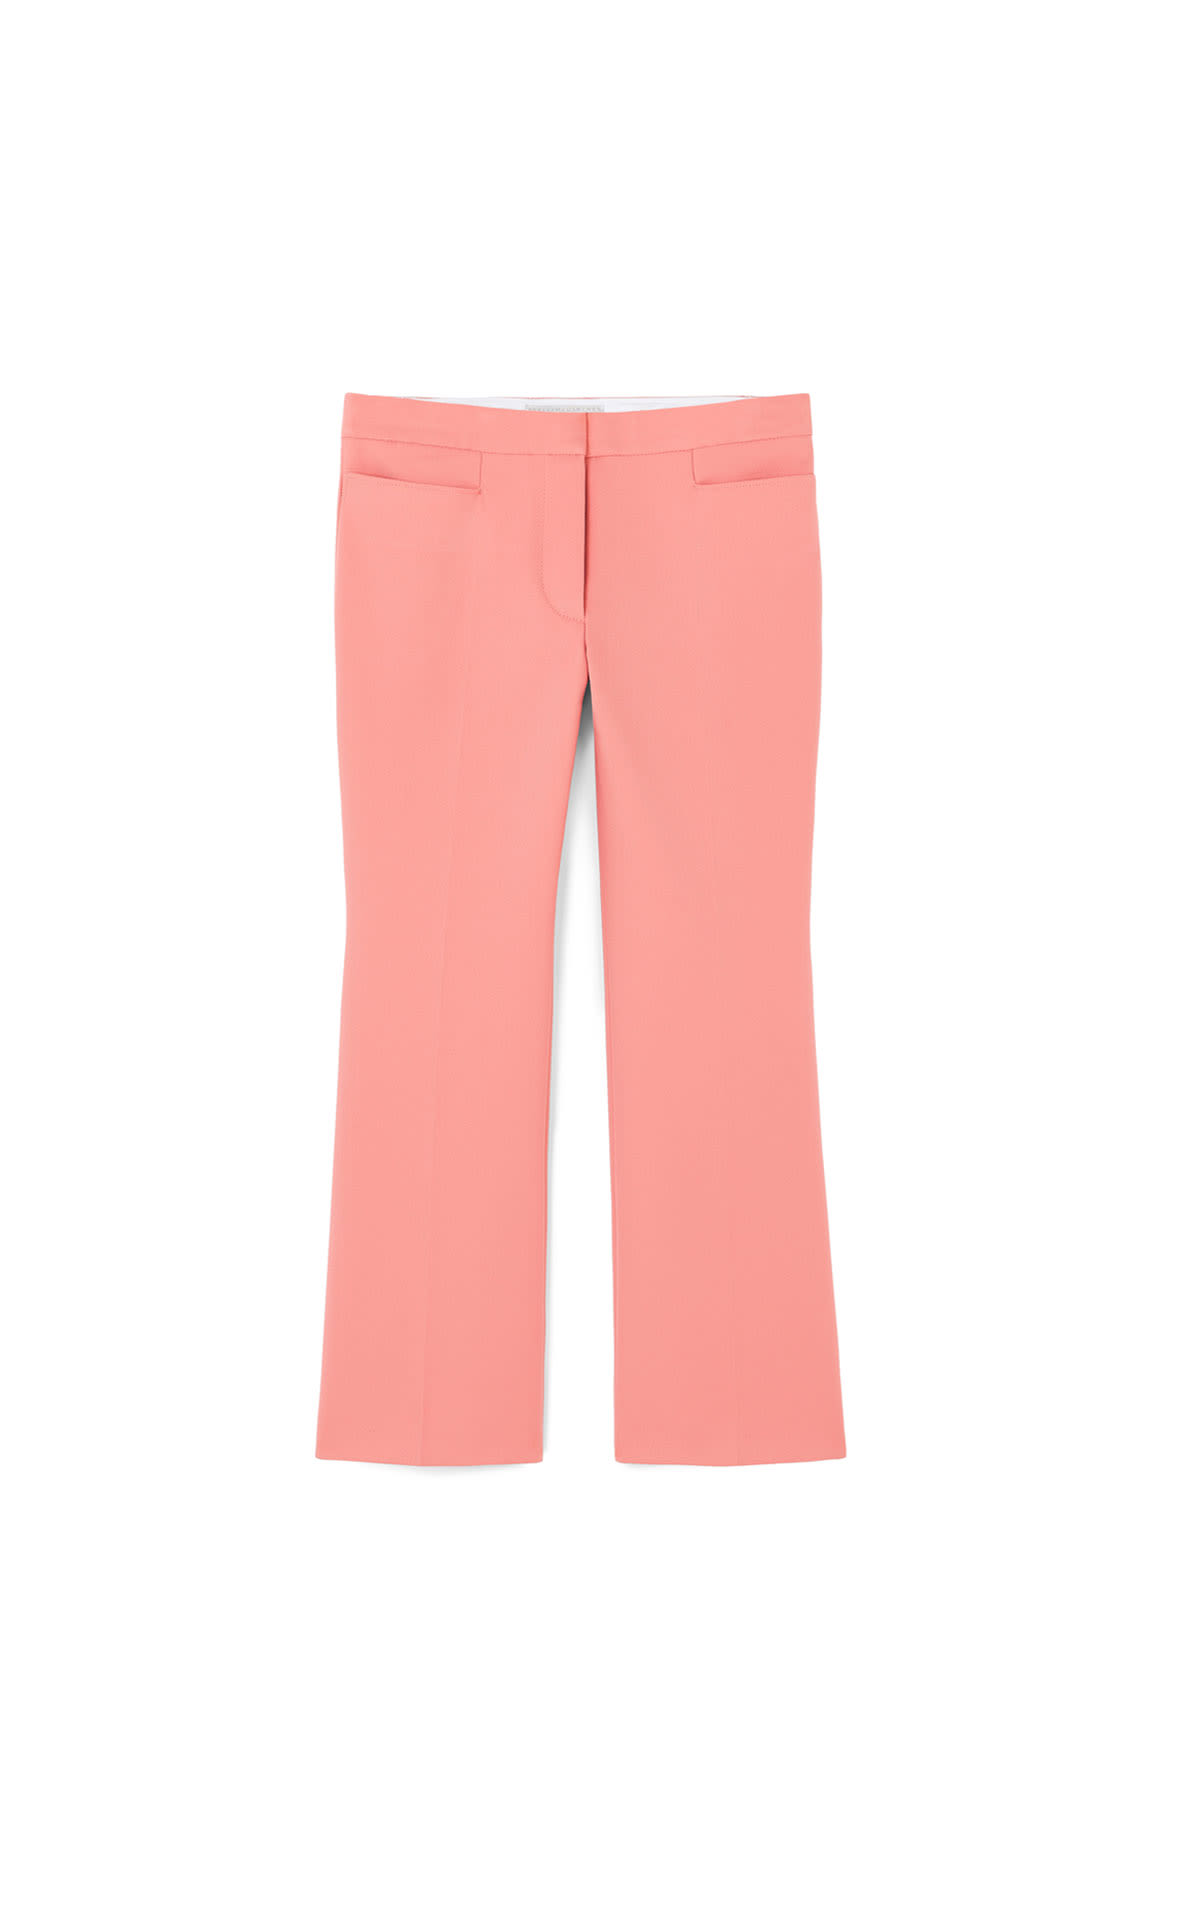 Stella McCartney Candy pink pants from Bicester Village